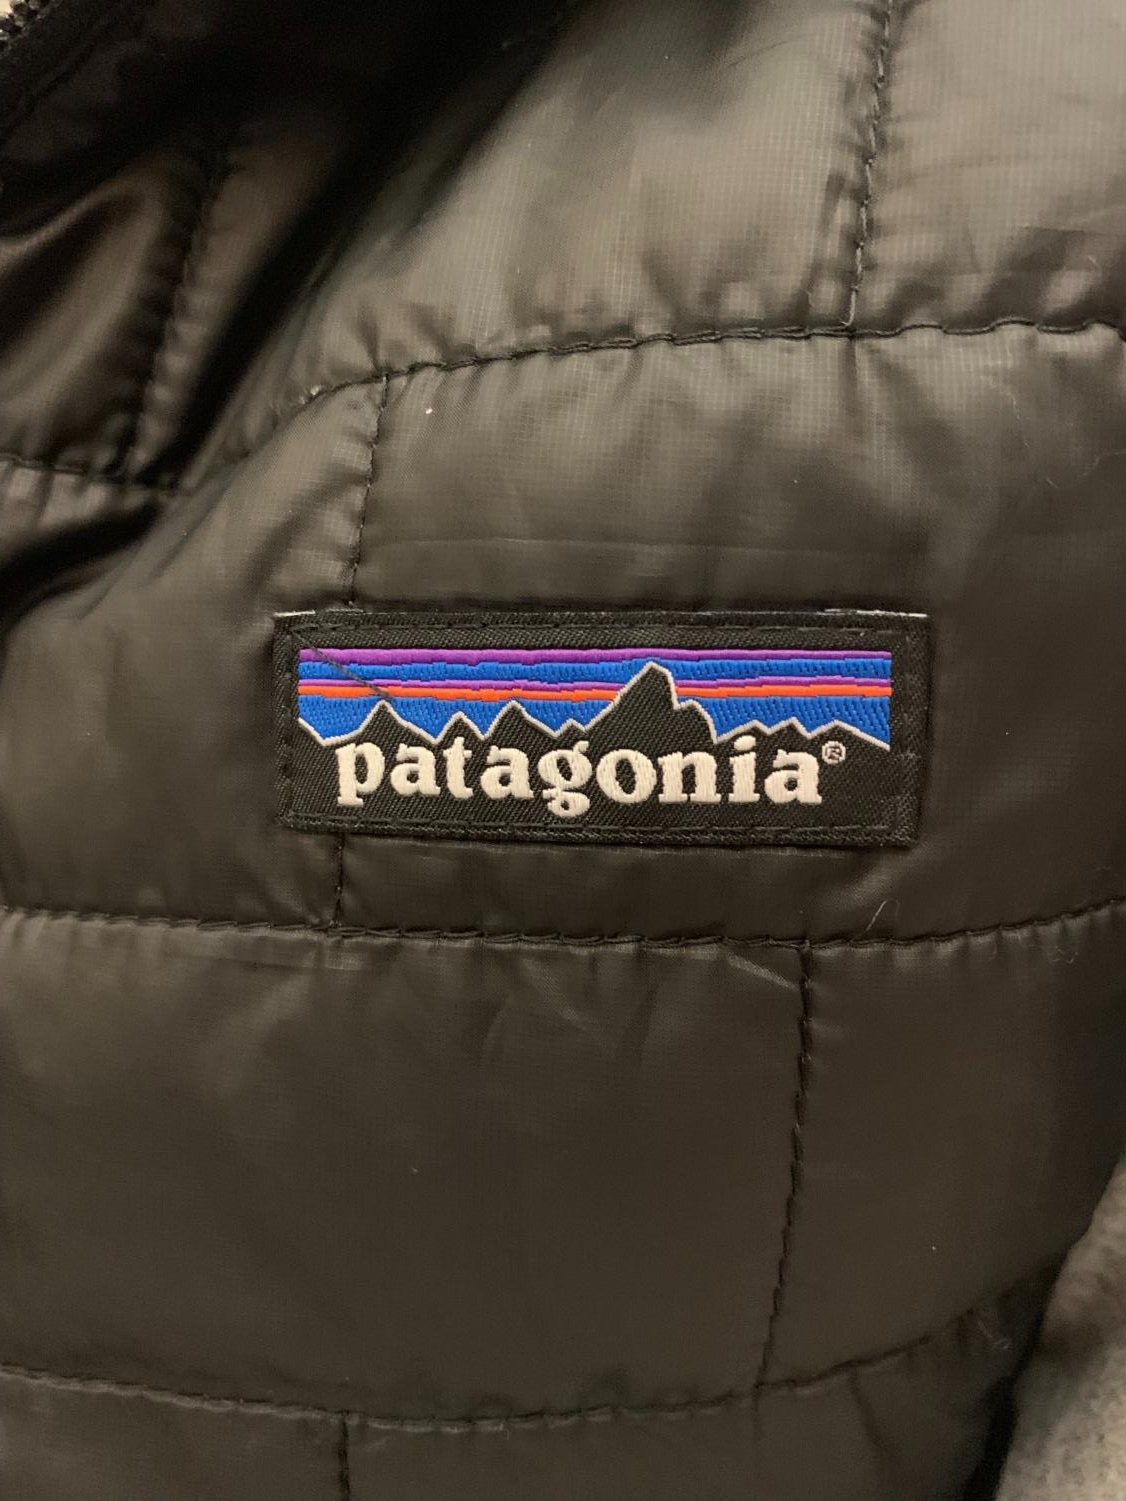 Patagonia invests in the environment – The Mirror